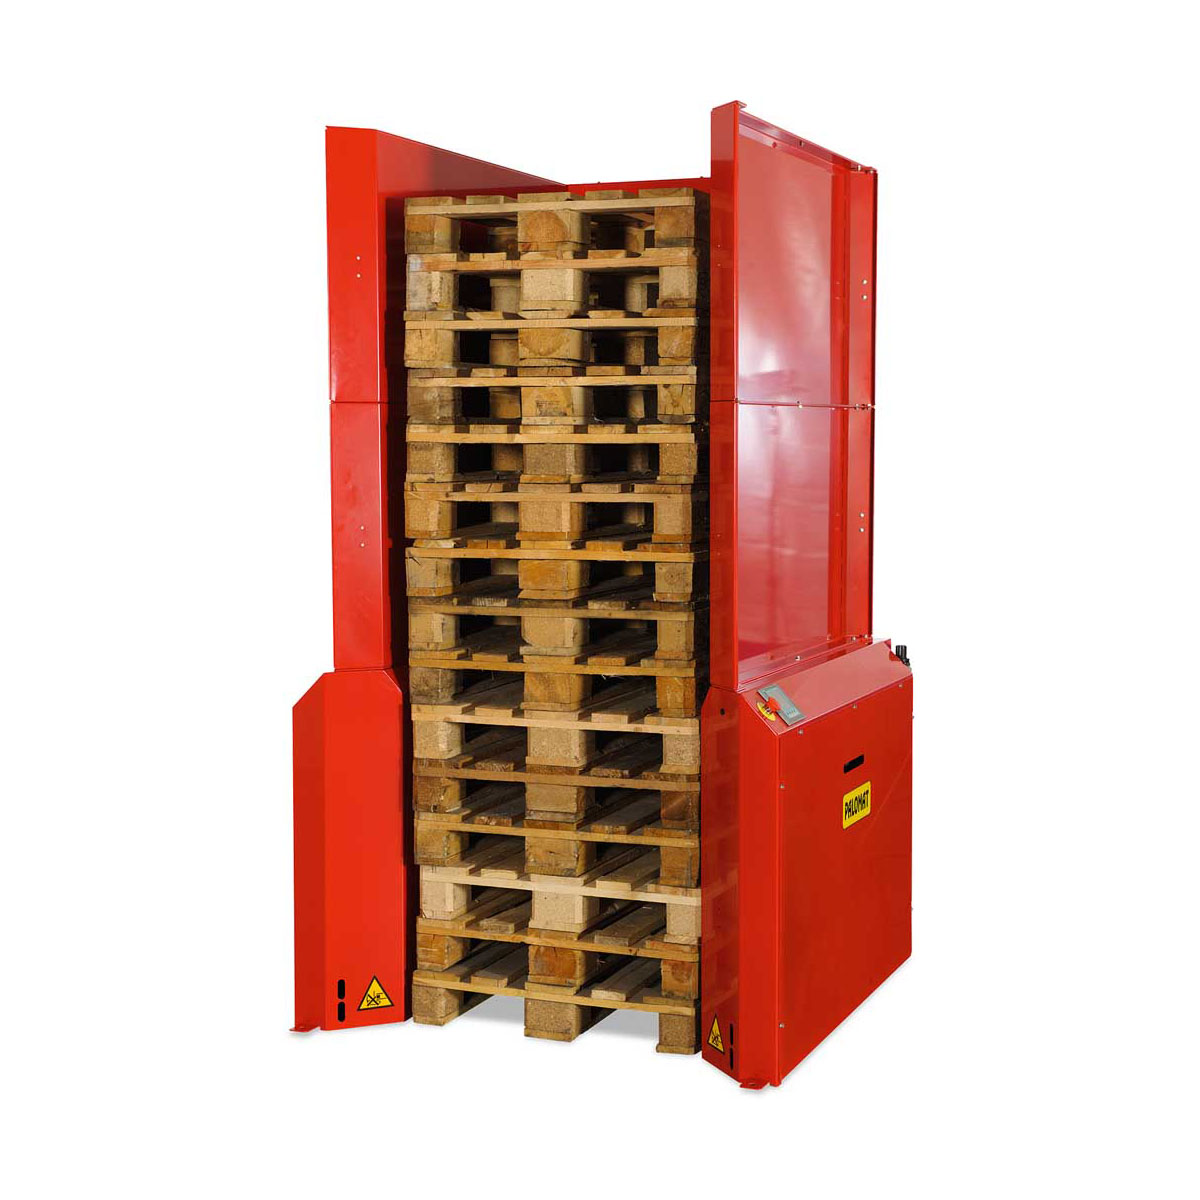 Buy Stack-Only Air Pallet  Dispensers in Pallet Dispenser from Palomat available at Astrolift NZ